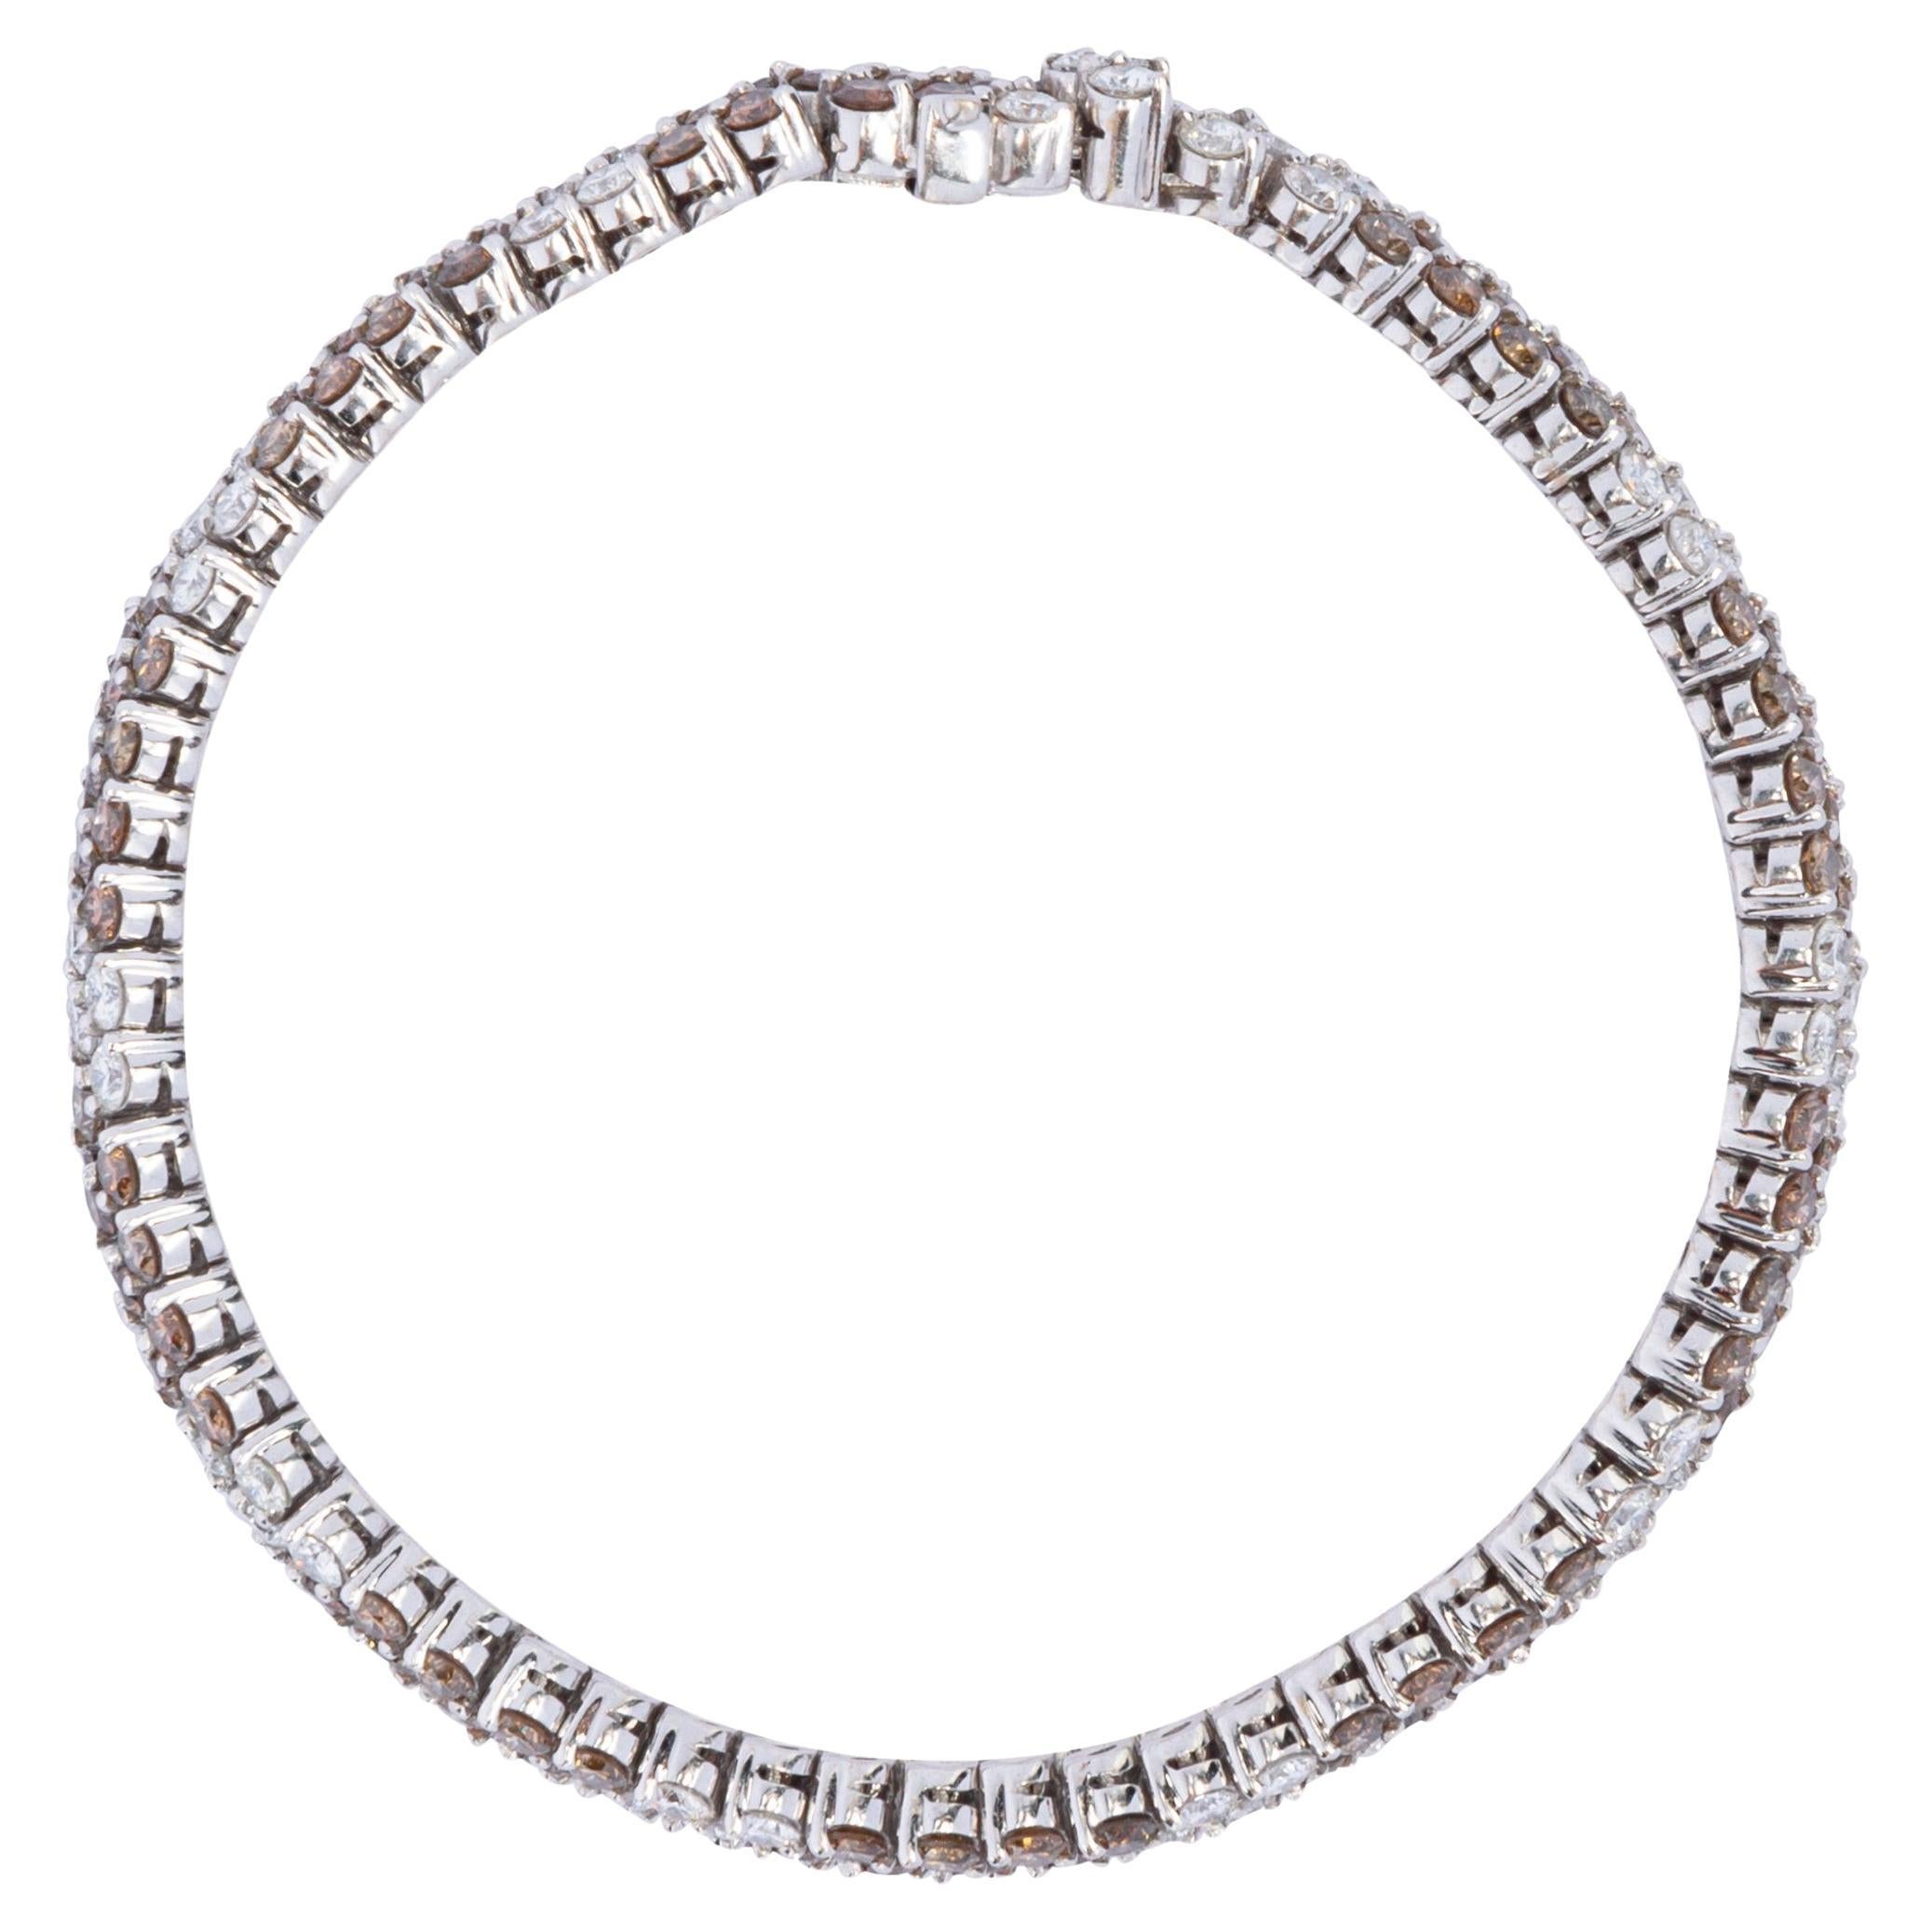 Alex Jona design collection, hand crafted in Italy, 18 Karat white gold bracelet set with alternating white and champagne round cut diamonds, it features 7.73 carats of champagne diamonds and 4.22 carats of white diamonds. The bracelet measures 18.5